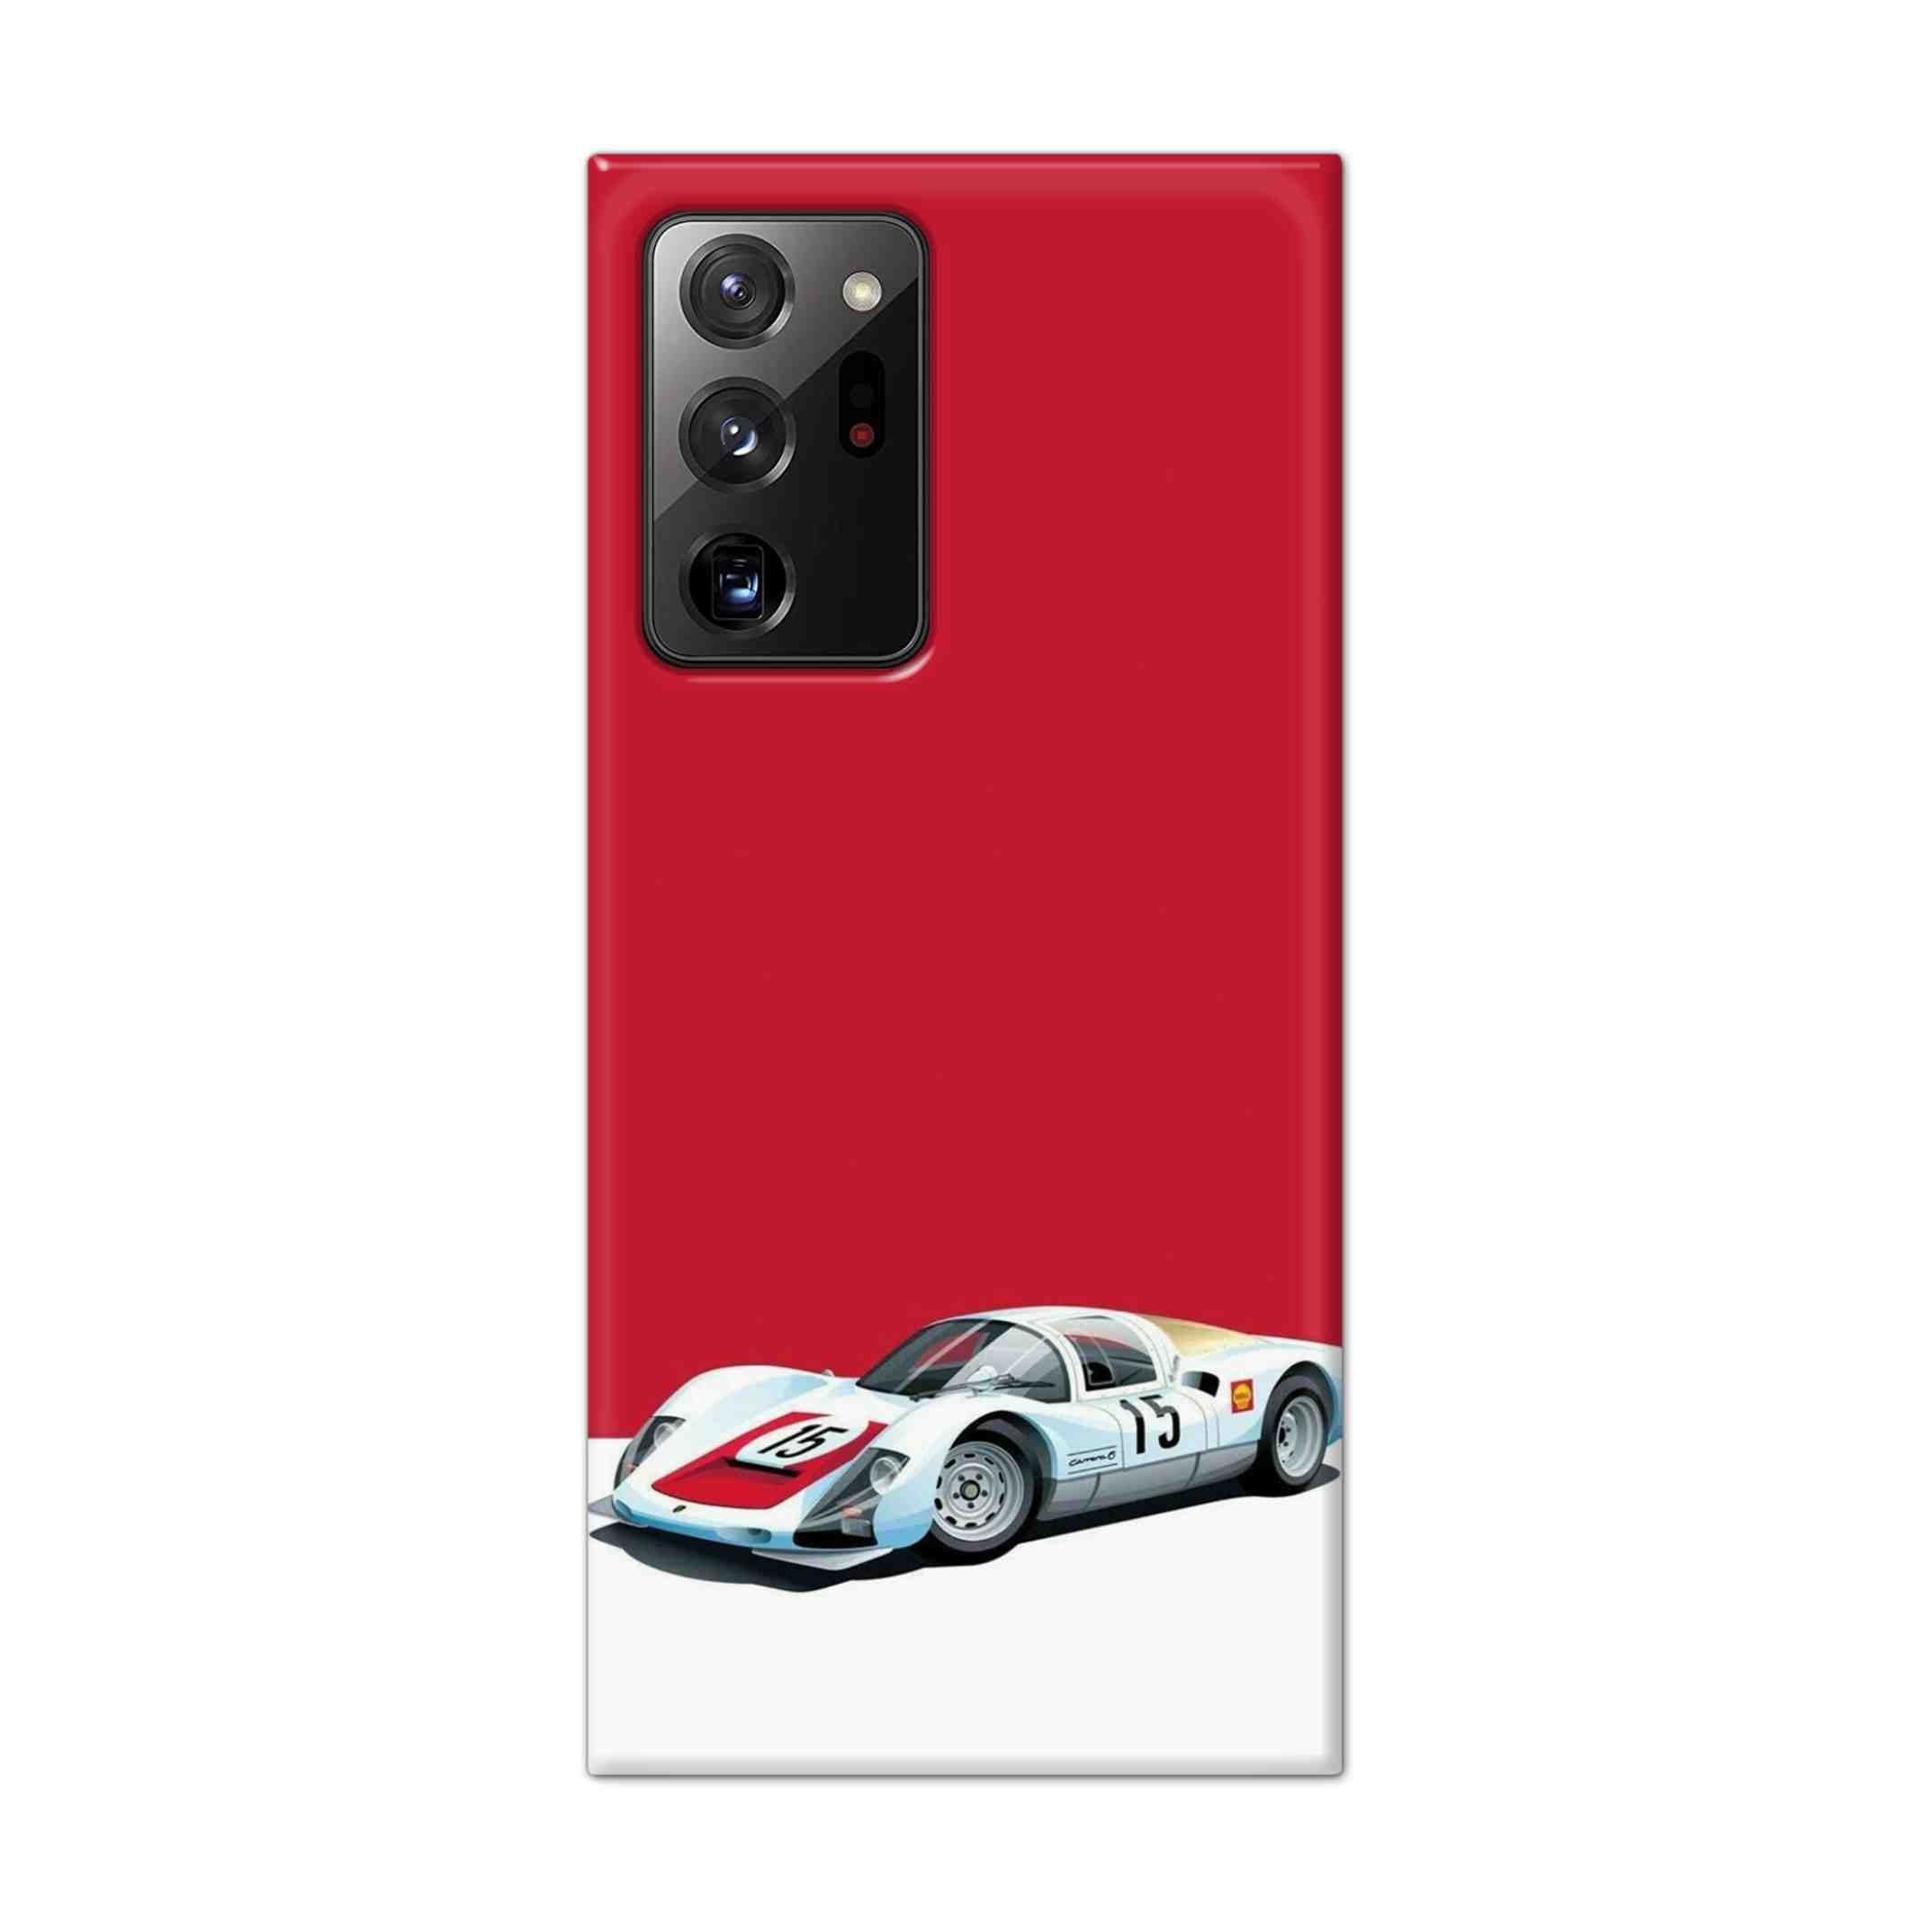 Buy Ferrari F15 Hard Back Mobile Phone Case Cover For Samsung Galaxy Note 20 Ultra Online